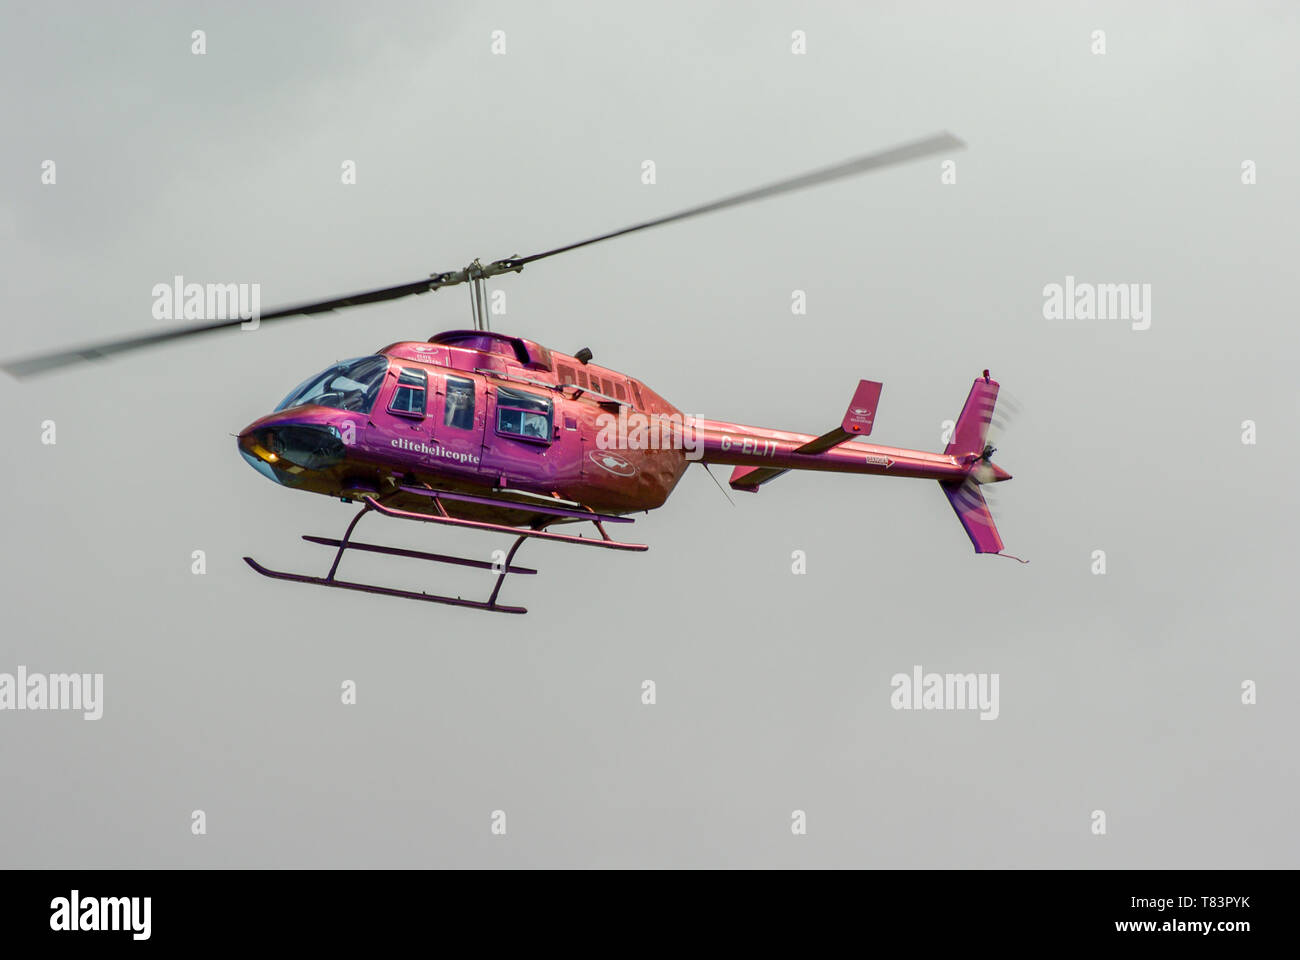 Bell 206 Longranger helicopter G-ELIT of Elite Helicopters (Henfield Lodge Aviation) flying. Civilian transport helicopter. Iridescent paint scheme Stock Photo